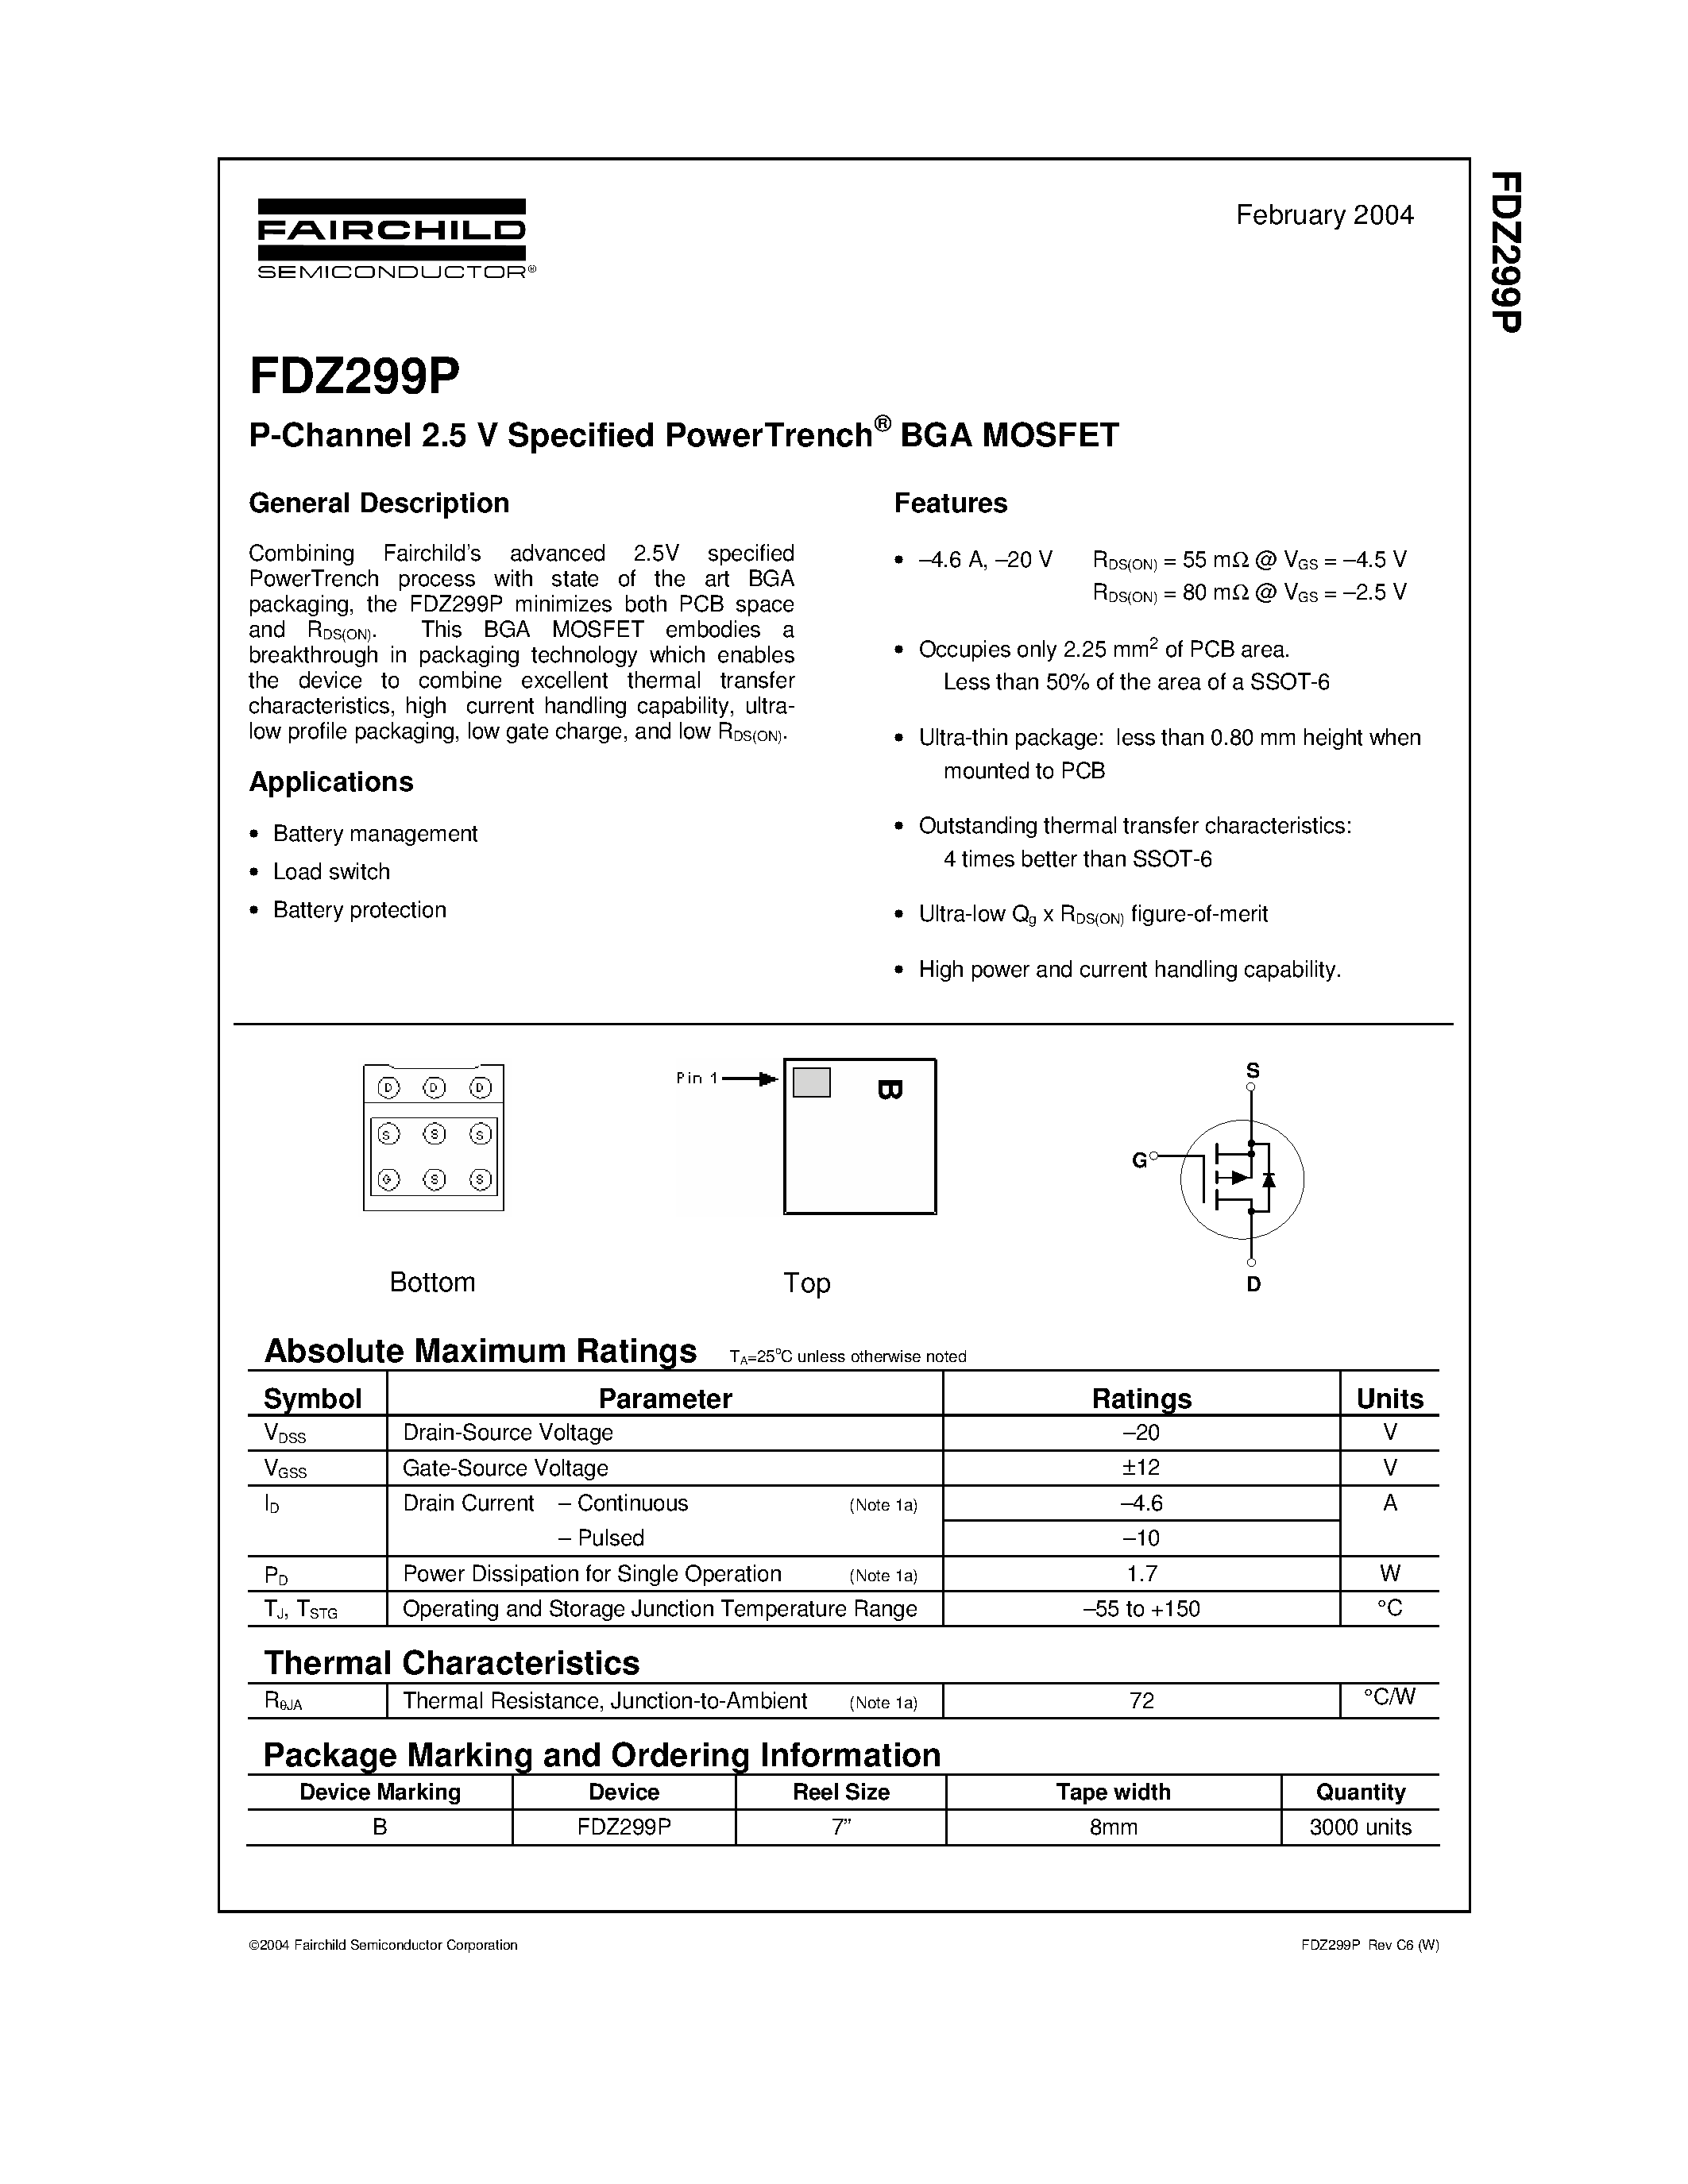 Datasheet FDZ299P - P-Channel 2.5 V Specified PowerTrench BGA MOSFET page 1